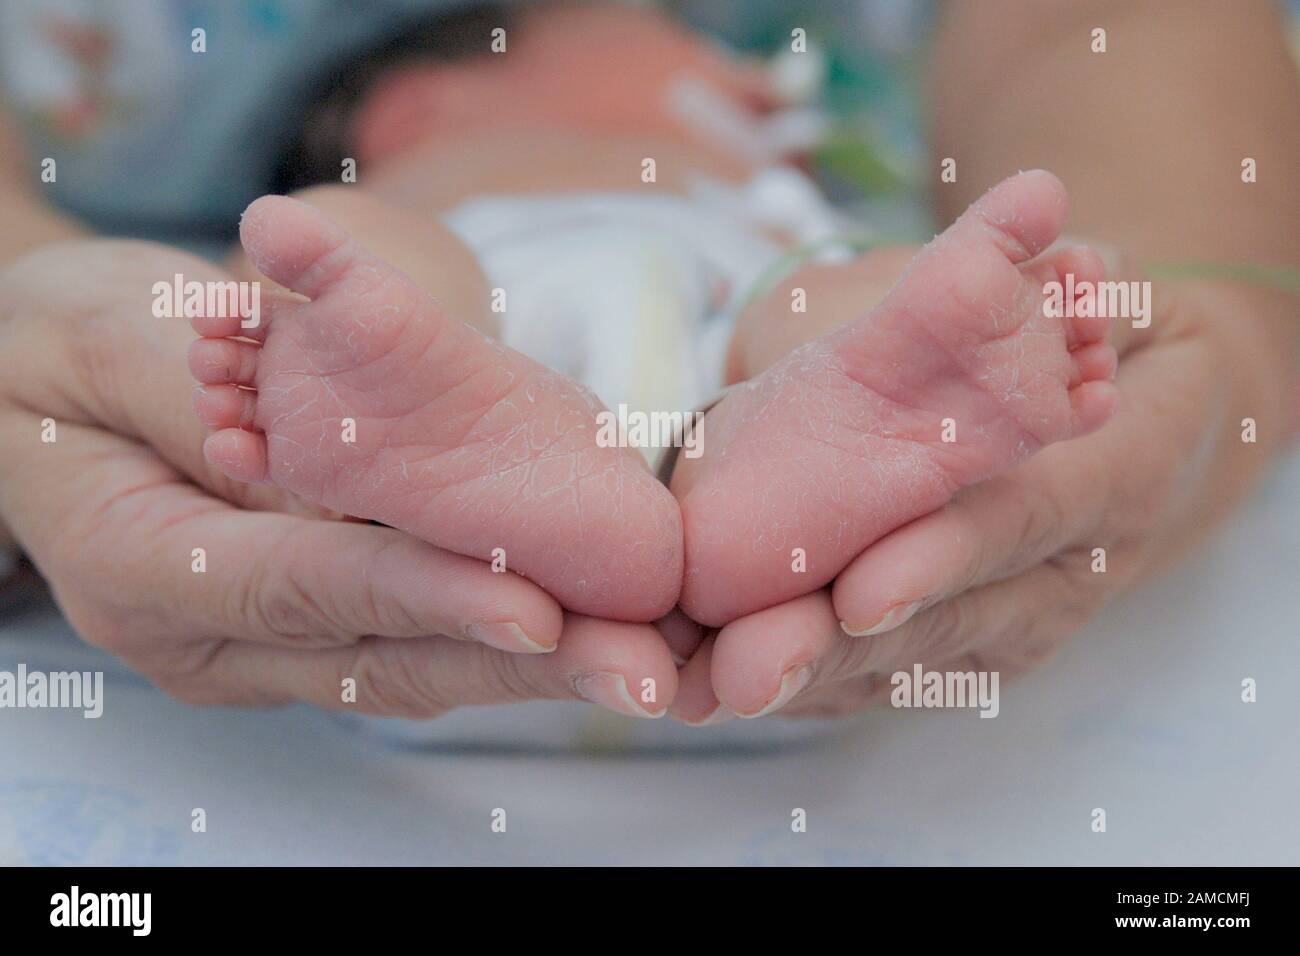 Feet of newborn baby held by adult hands, at chidren's hospital.  Guayaquil.  Ecuador Stock Photo